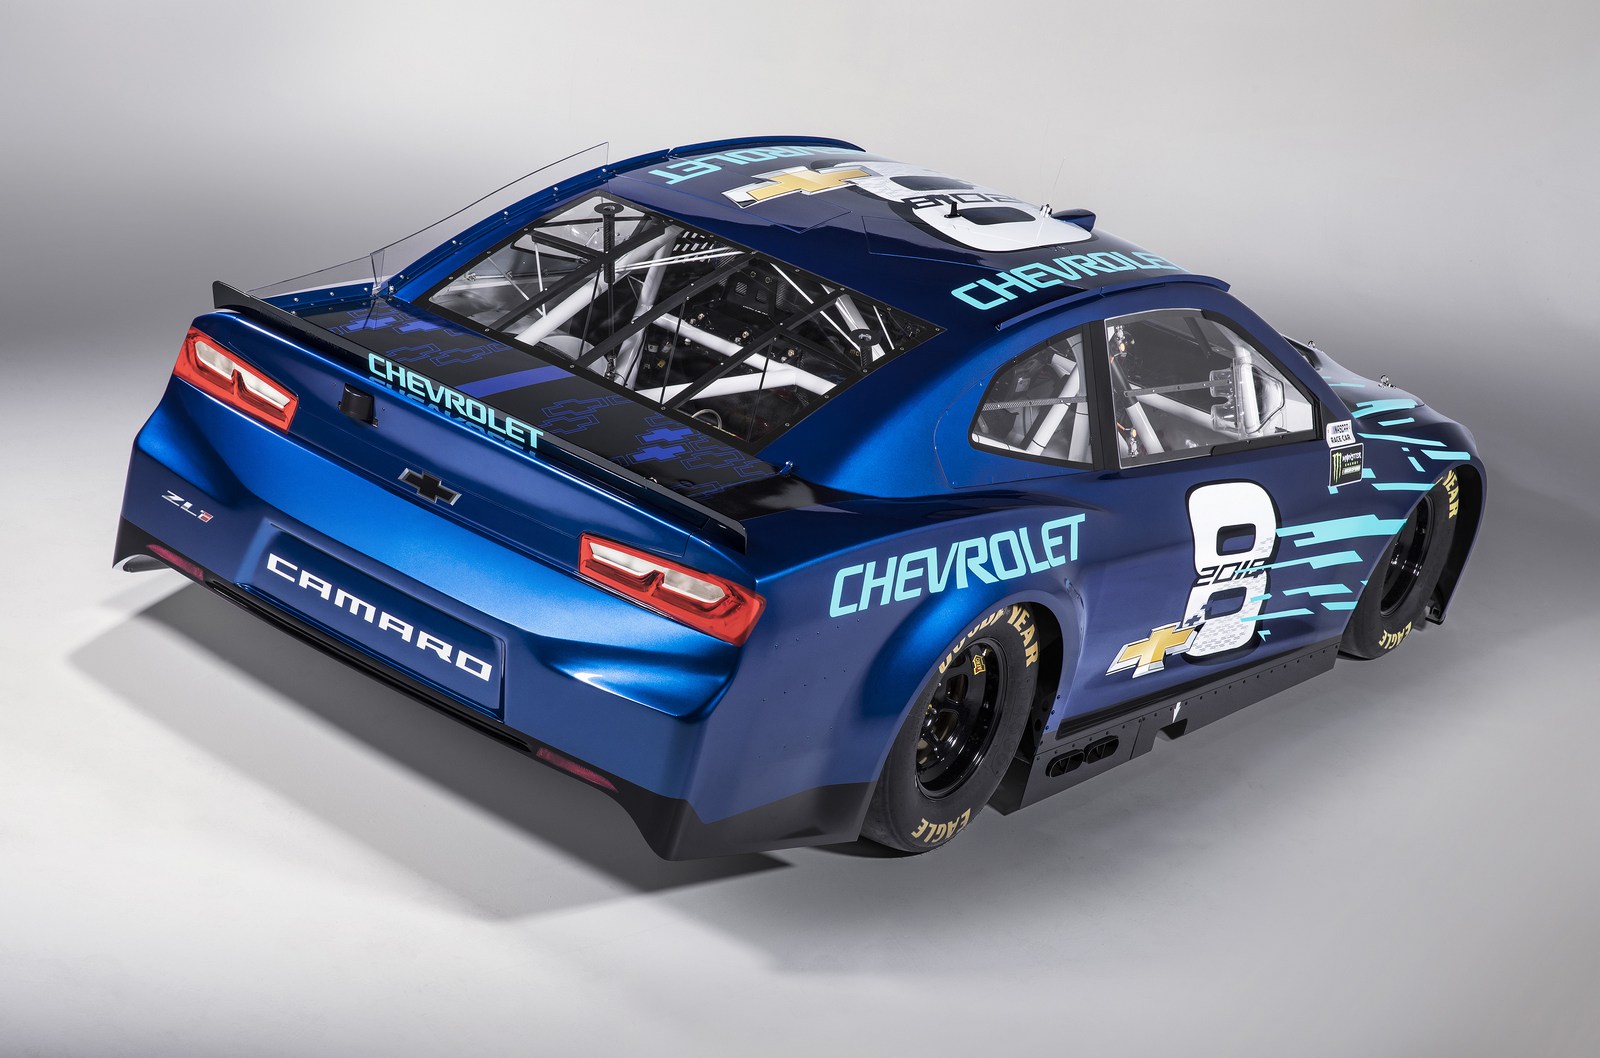 The Camaro ZL1 is the new Chevrolet race car of the Monster Energy NASCAR Cup Series. It makes its competition debut next February, with the start of the 2018 season.